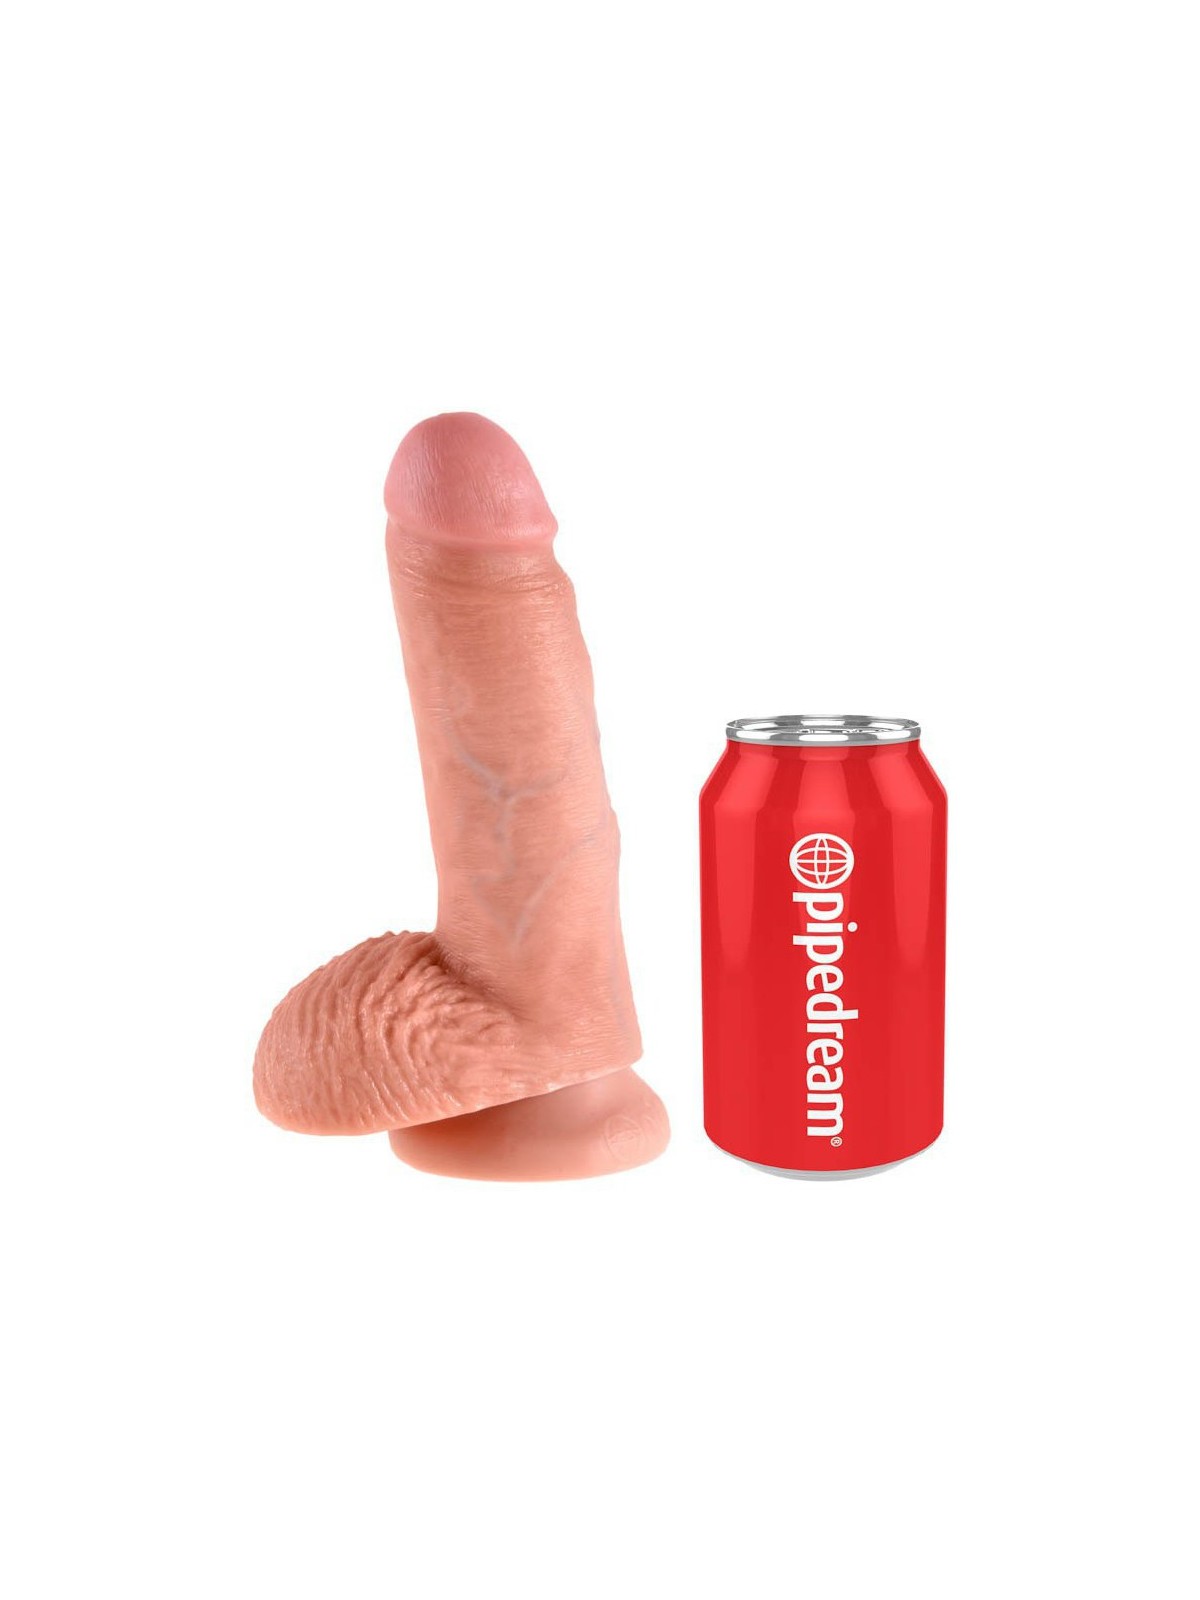 Realistic gods Realistic god King Cock 16 x 4.6 cm This realistic dildo is a brand sex toy King Cock. It is made from a soft and